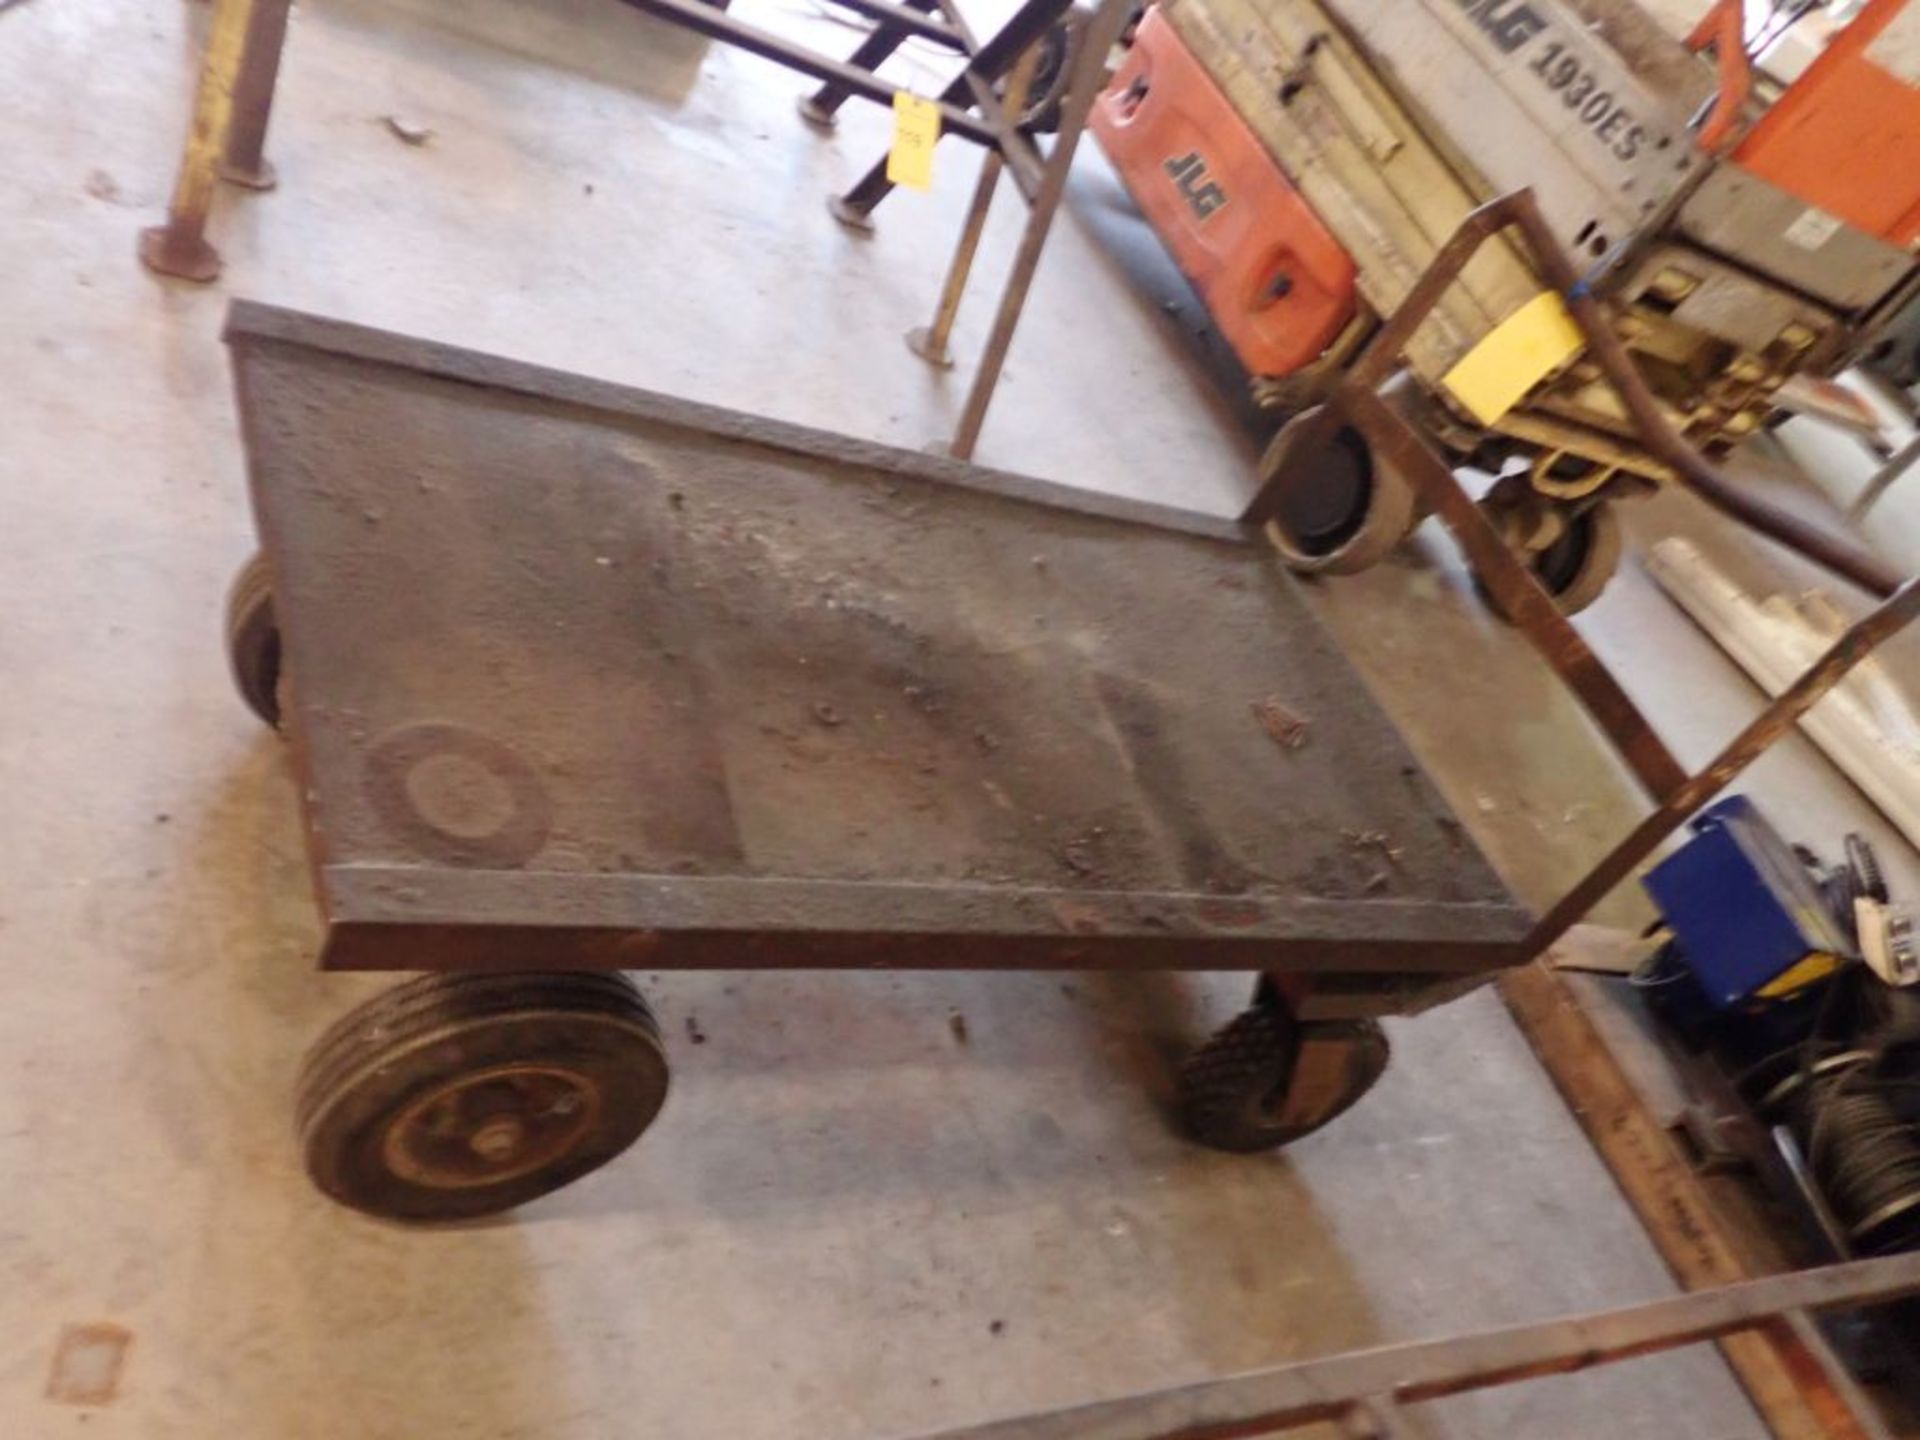 Load Cart - Image 3 of 4